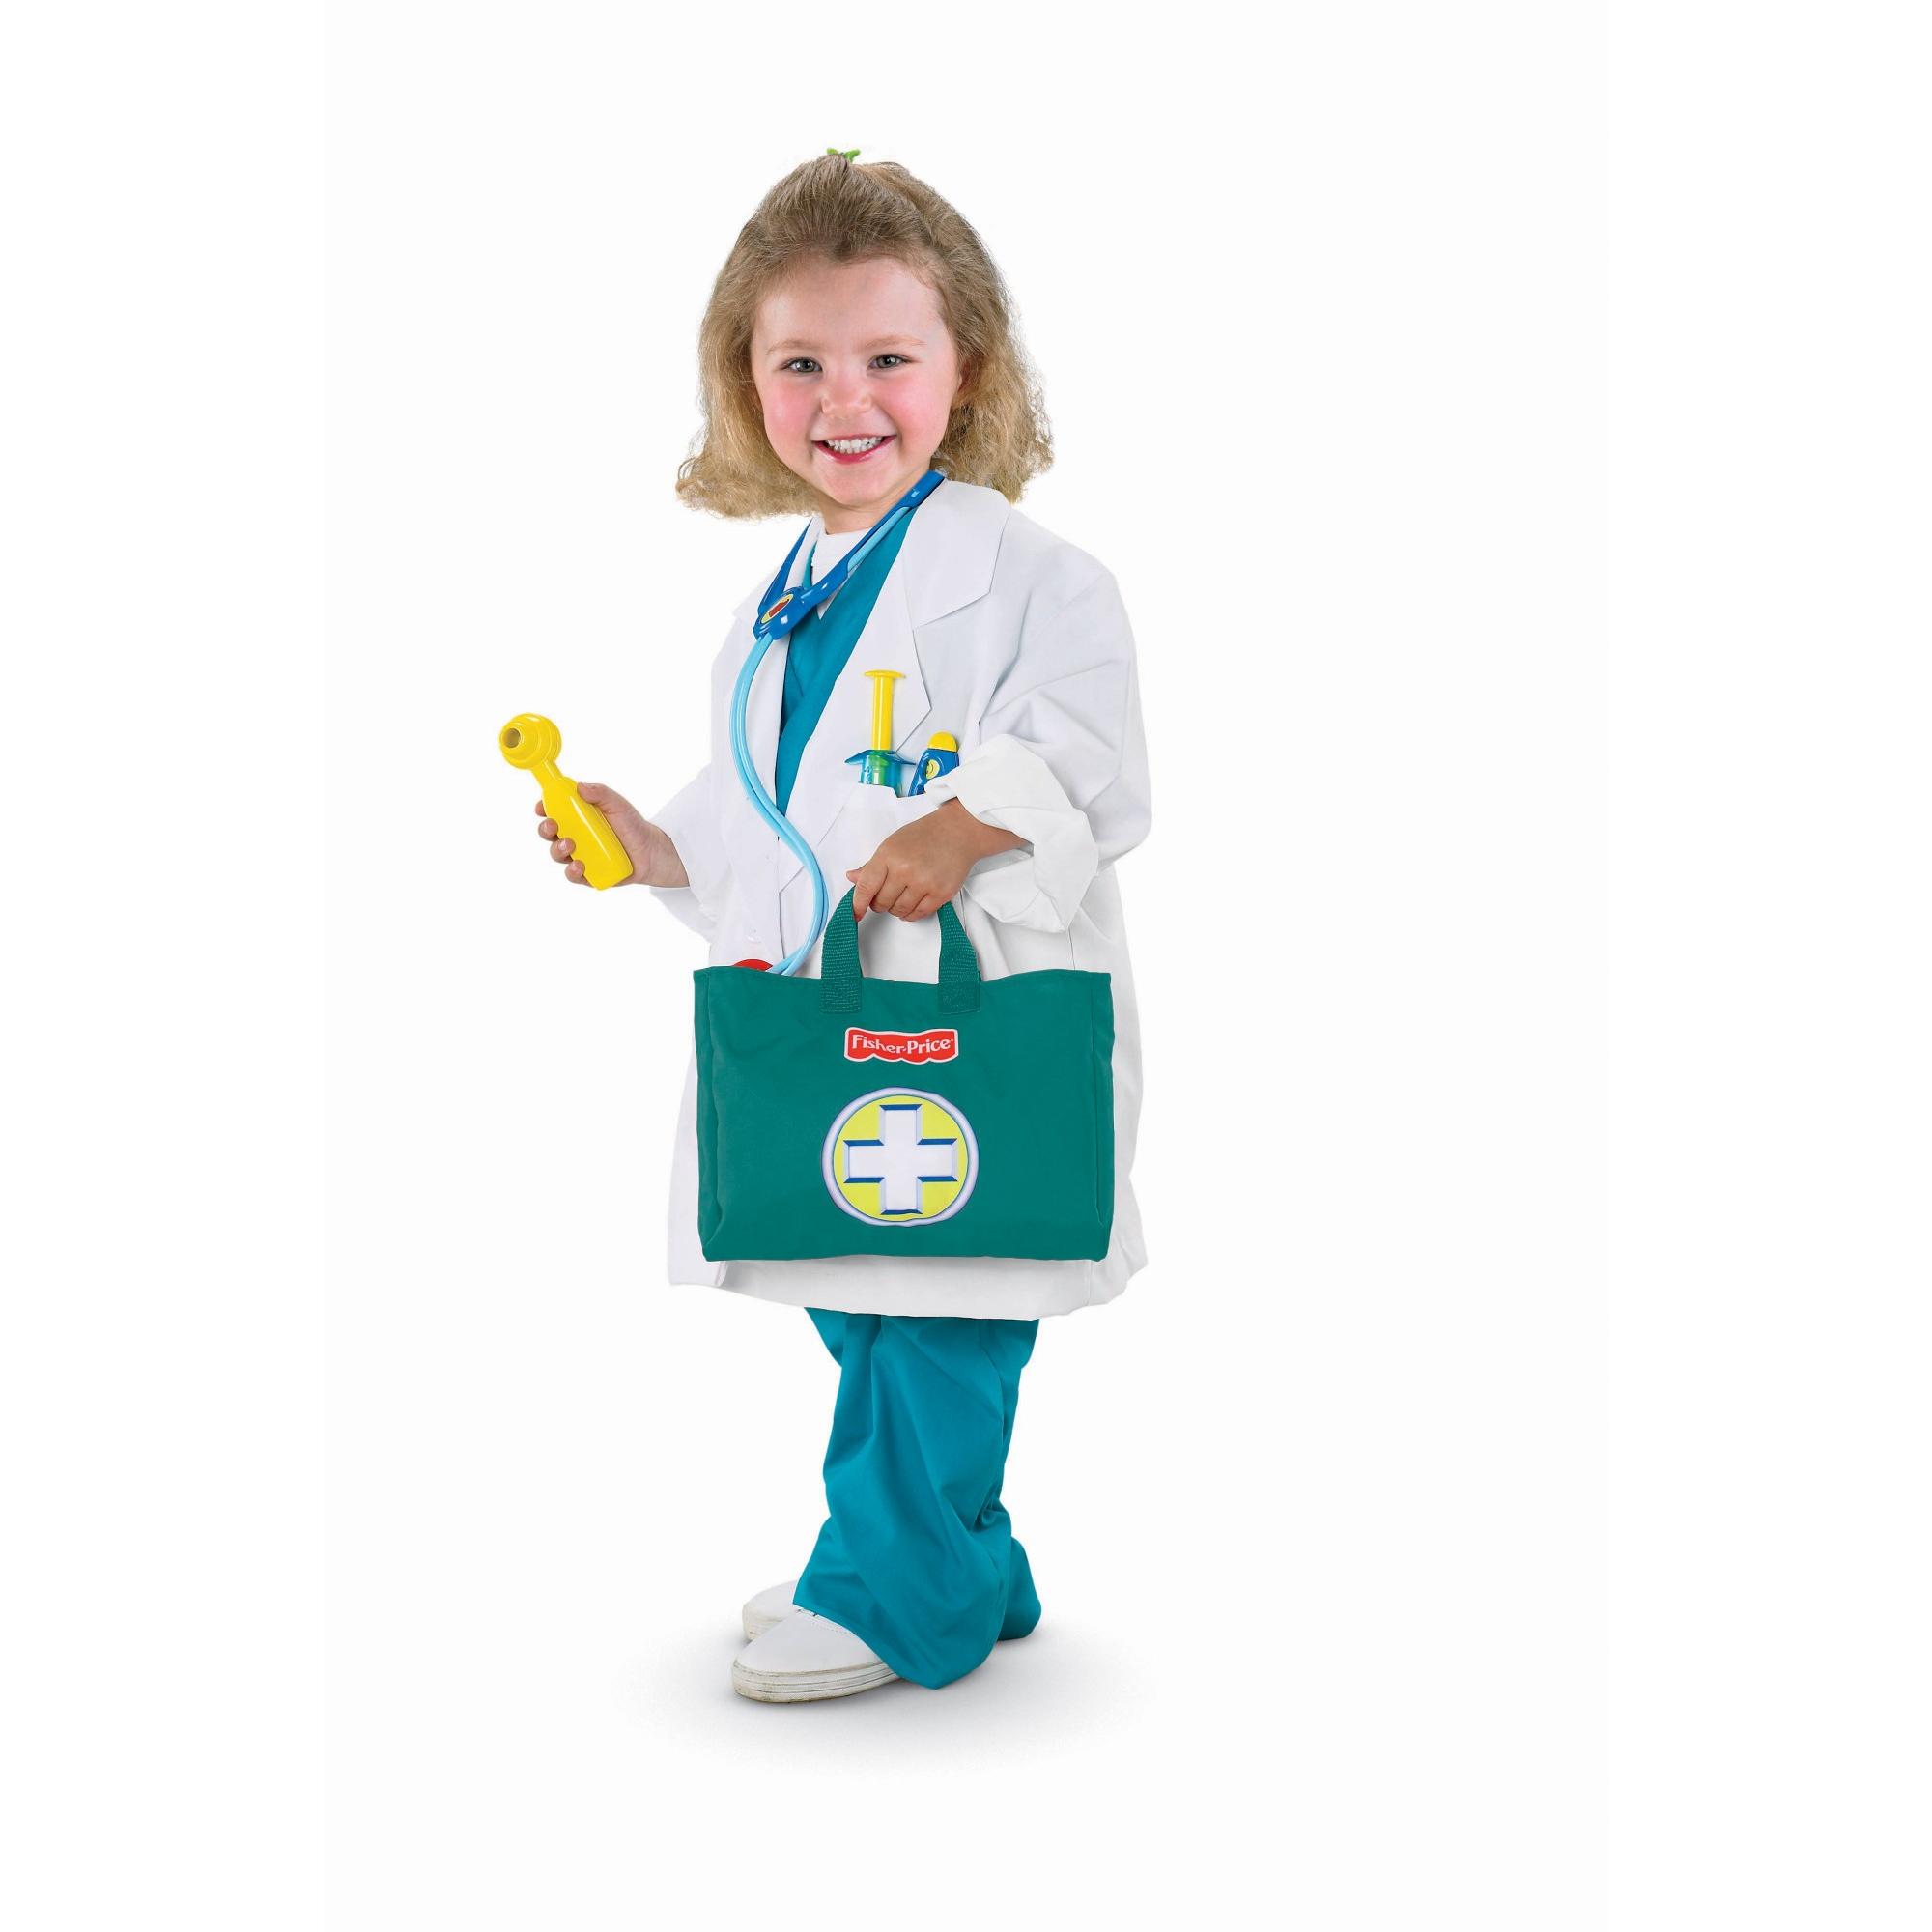 Fisher-Price Medical Kit with Doctor Bag Playset - image 1 of 5